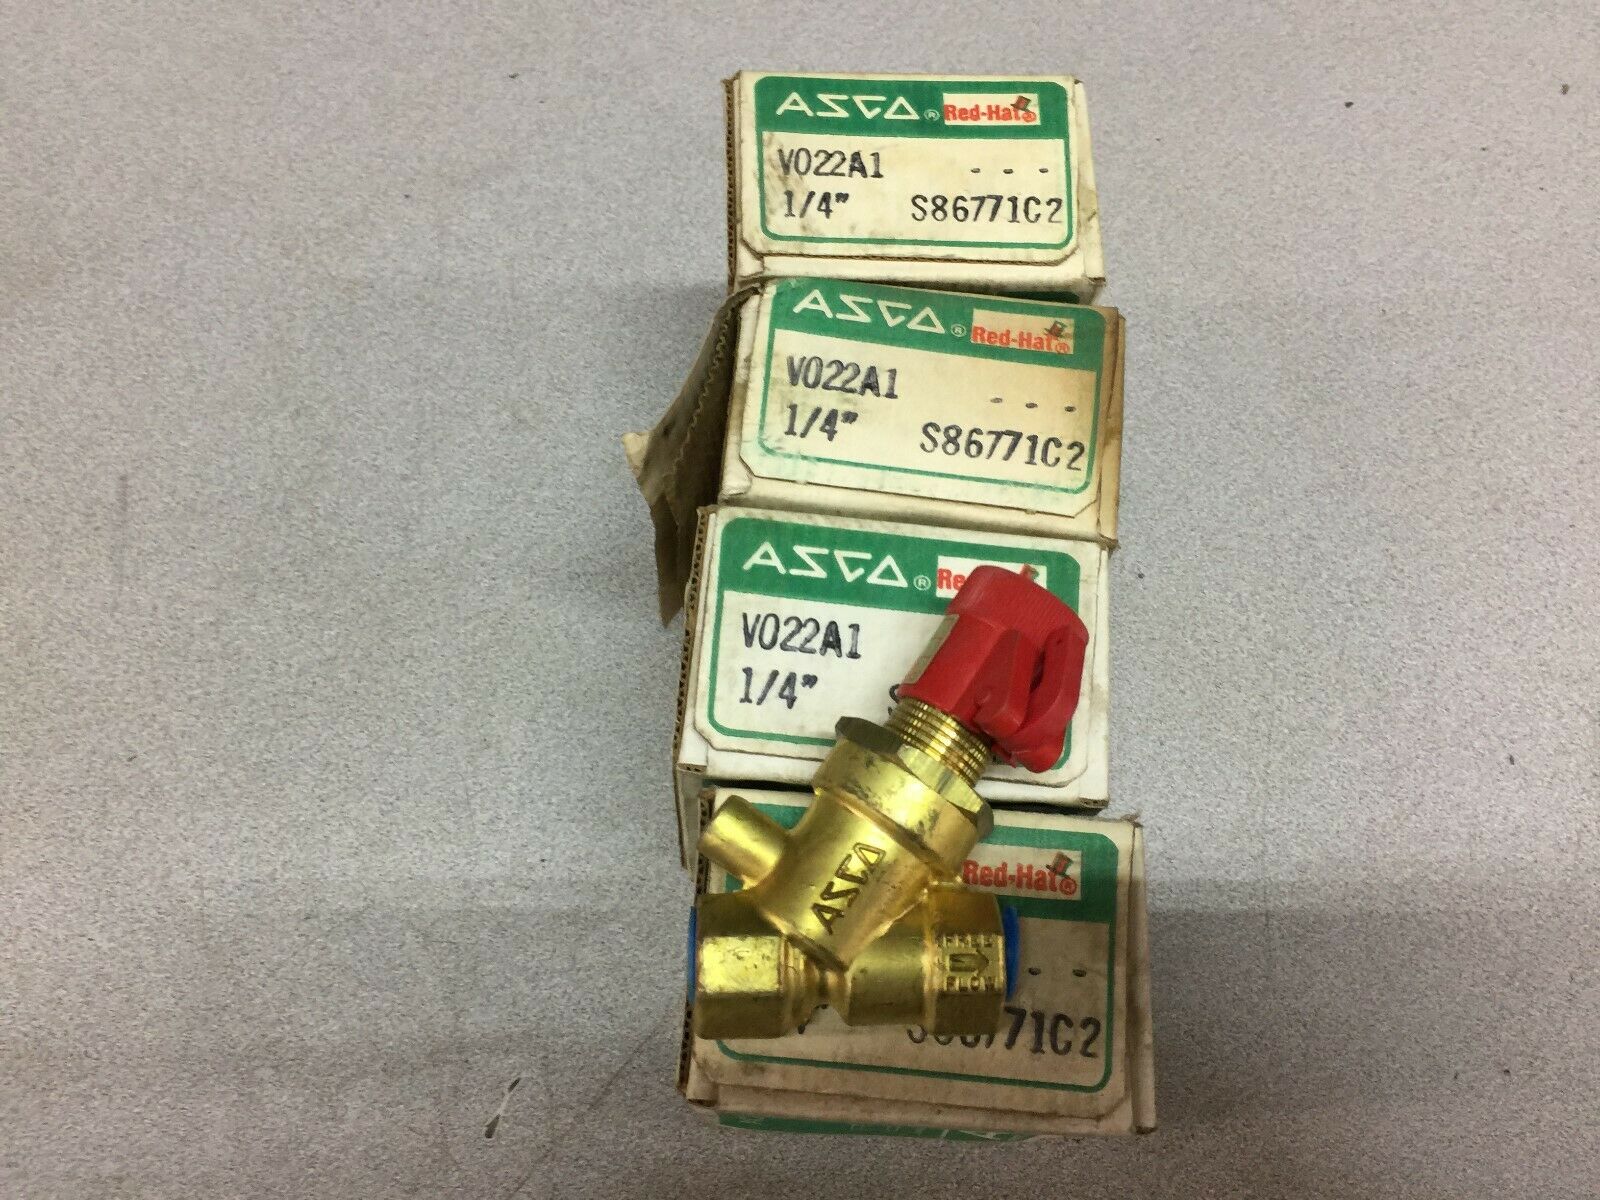 NEW IN BOX (LOT OF 4) ASCO 1/4" FLOW CONTROL VALVE V022A1